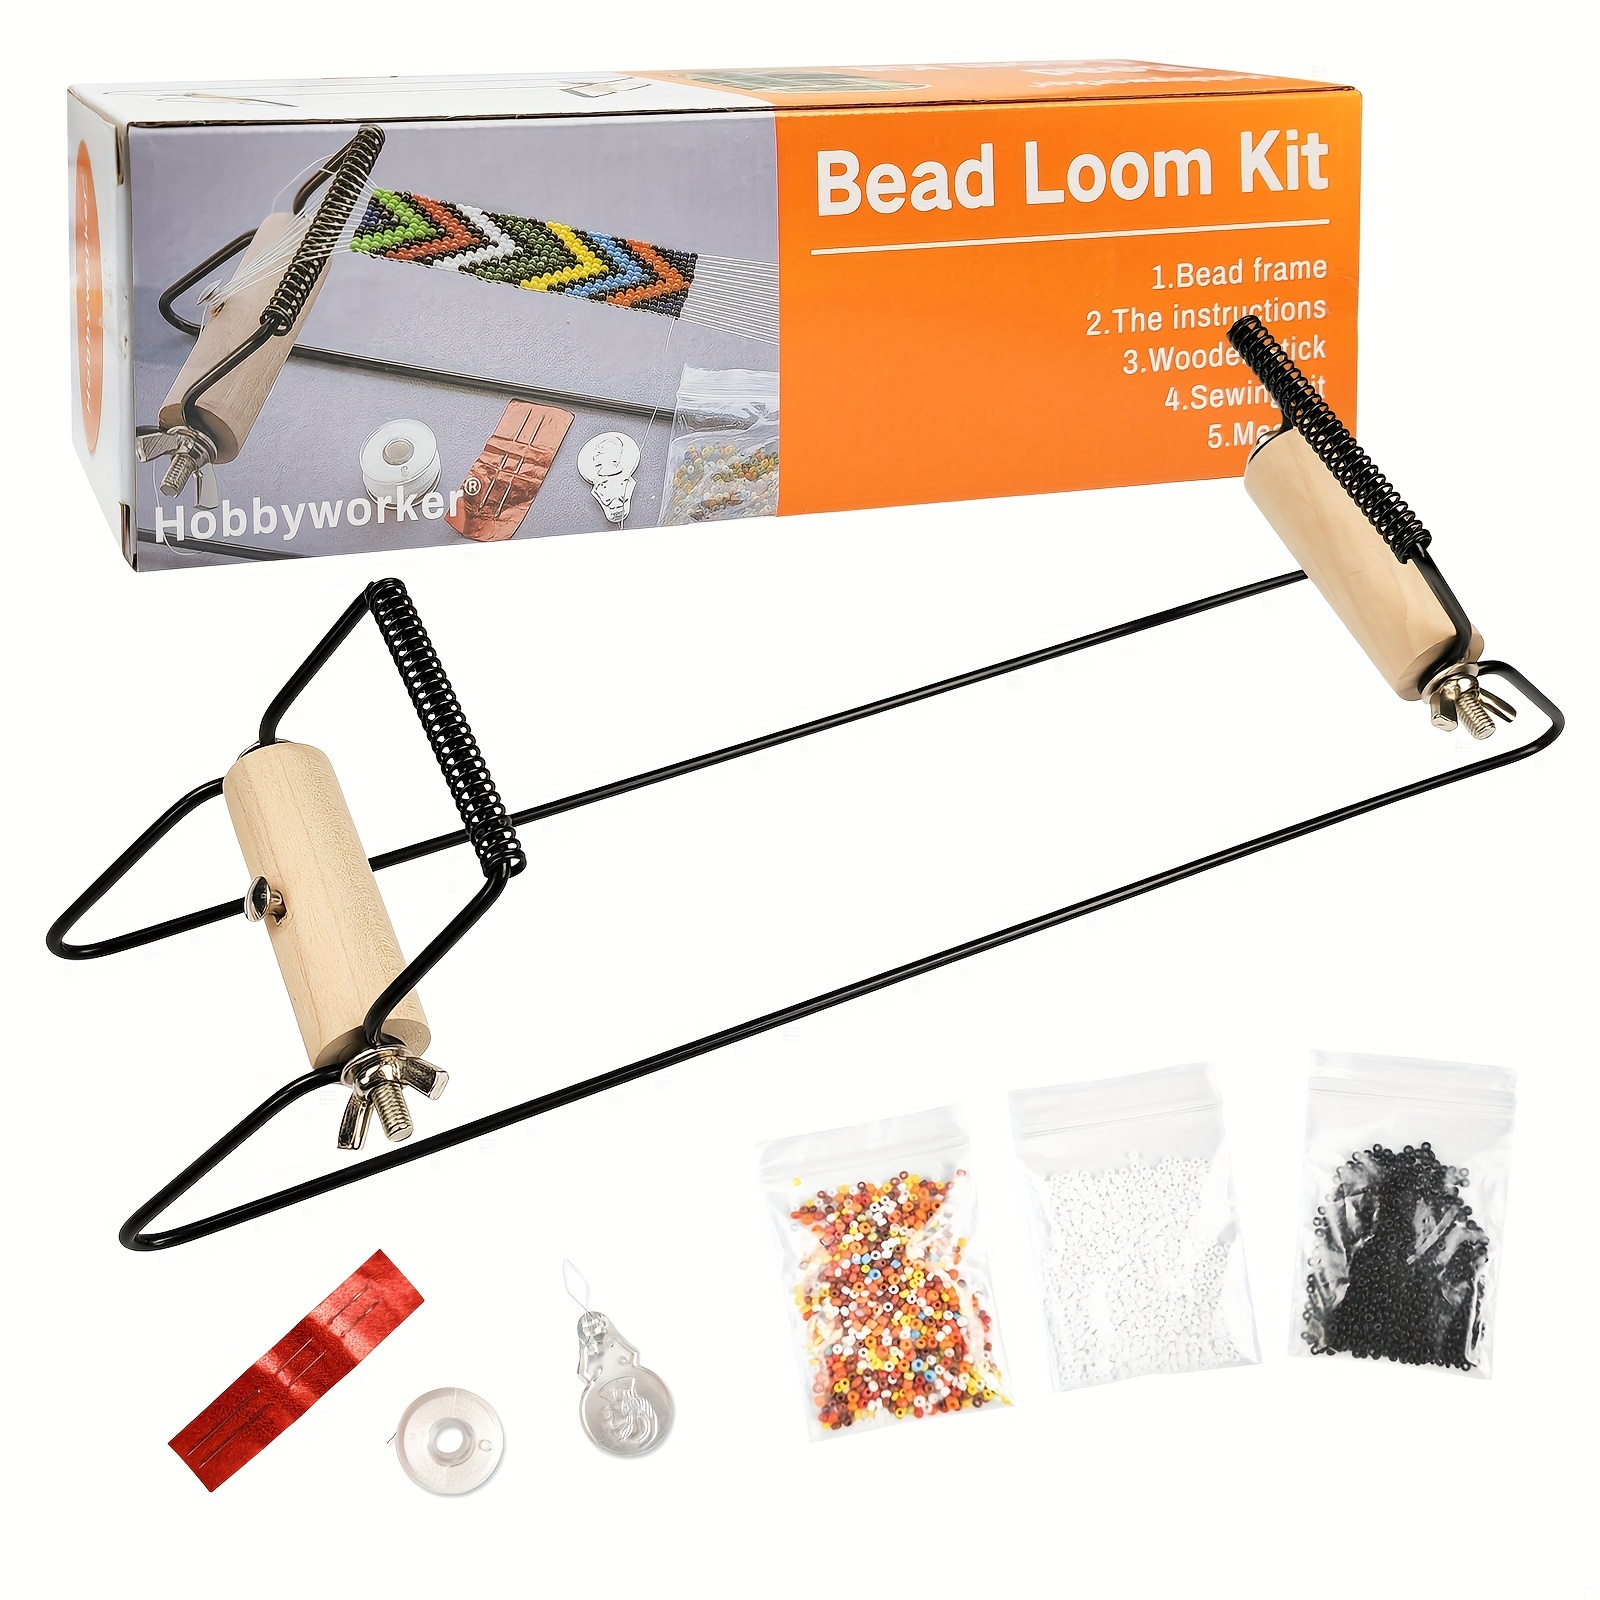 

The Hobbyworker Extra Wide Metal Bead Loom Kit, Includes Extra Wide Loom, Thread, Needles, And 3 Bags Glass Beads For Bracelets, Necklaces, Belts, And More Jewelry Making Crafts